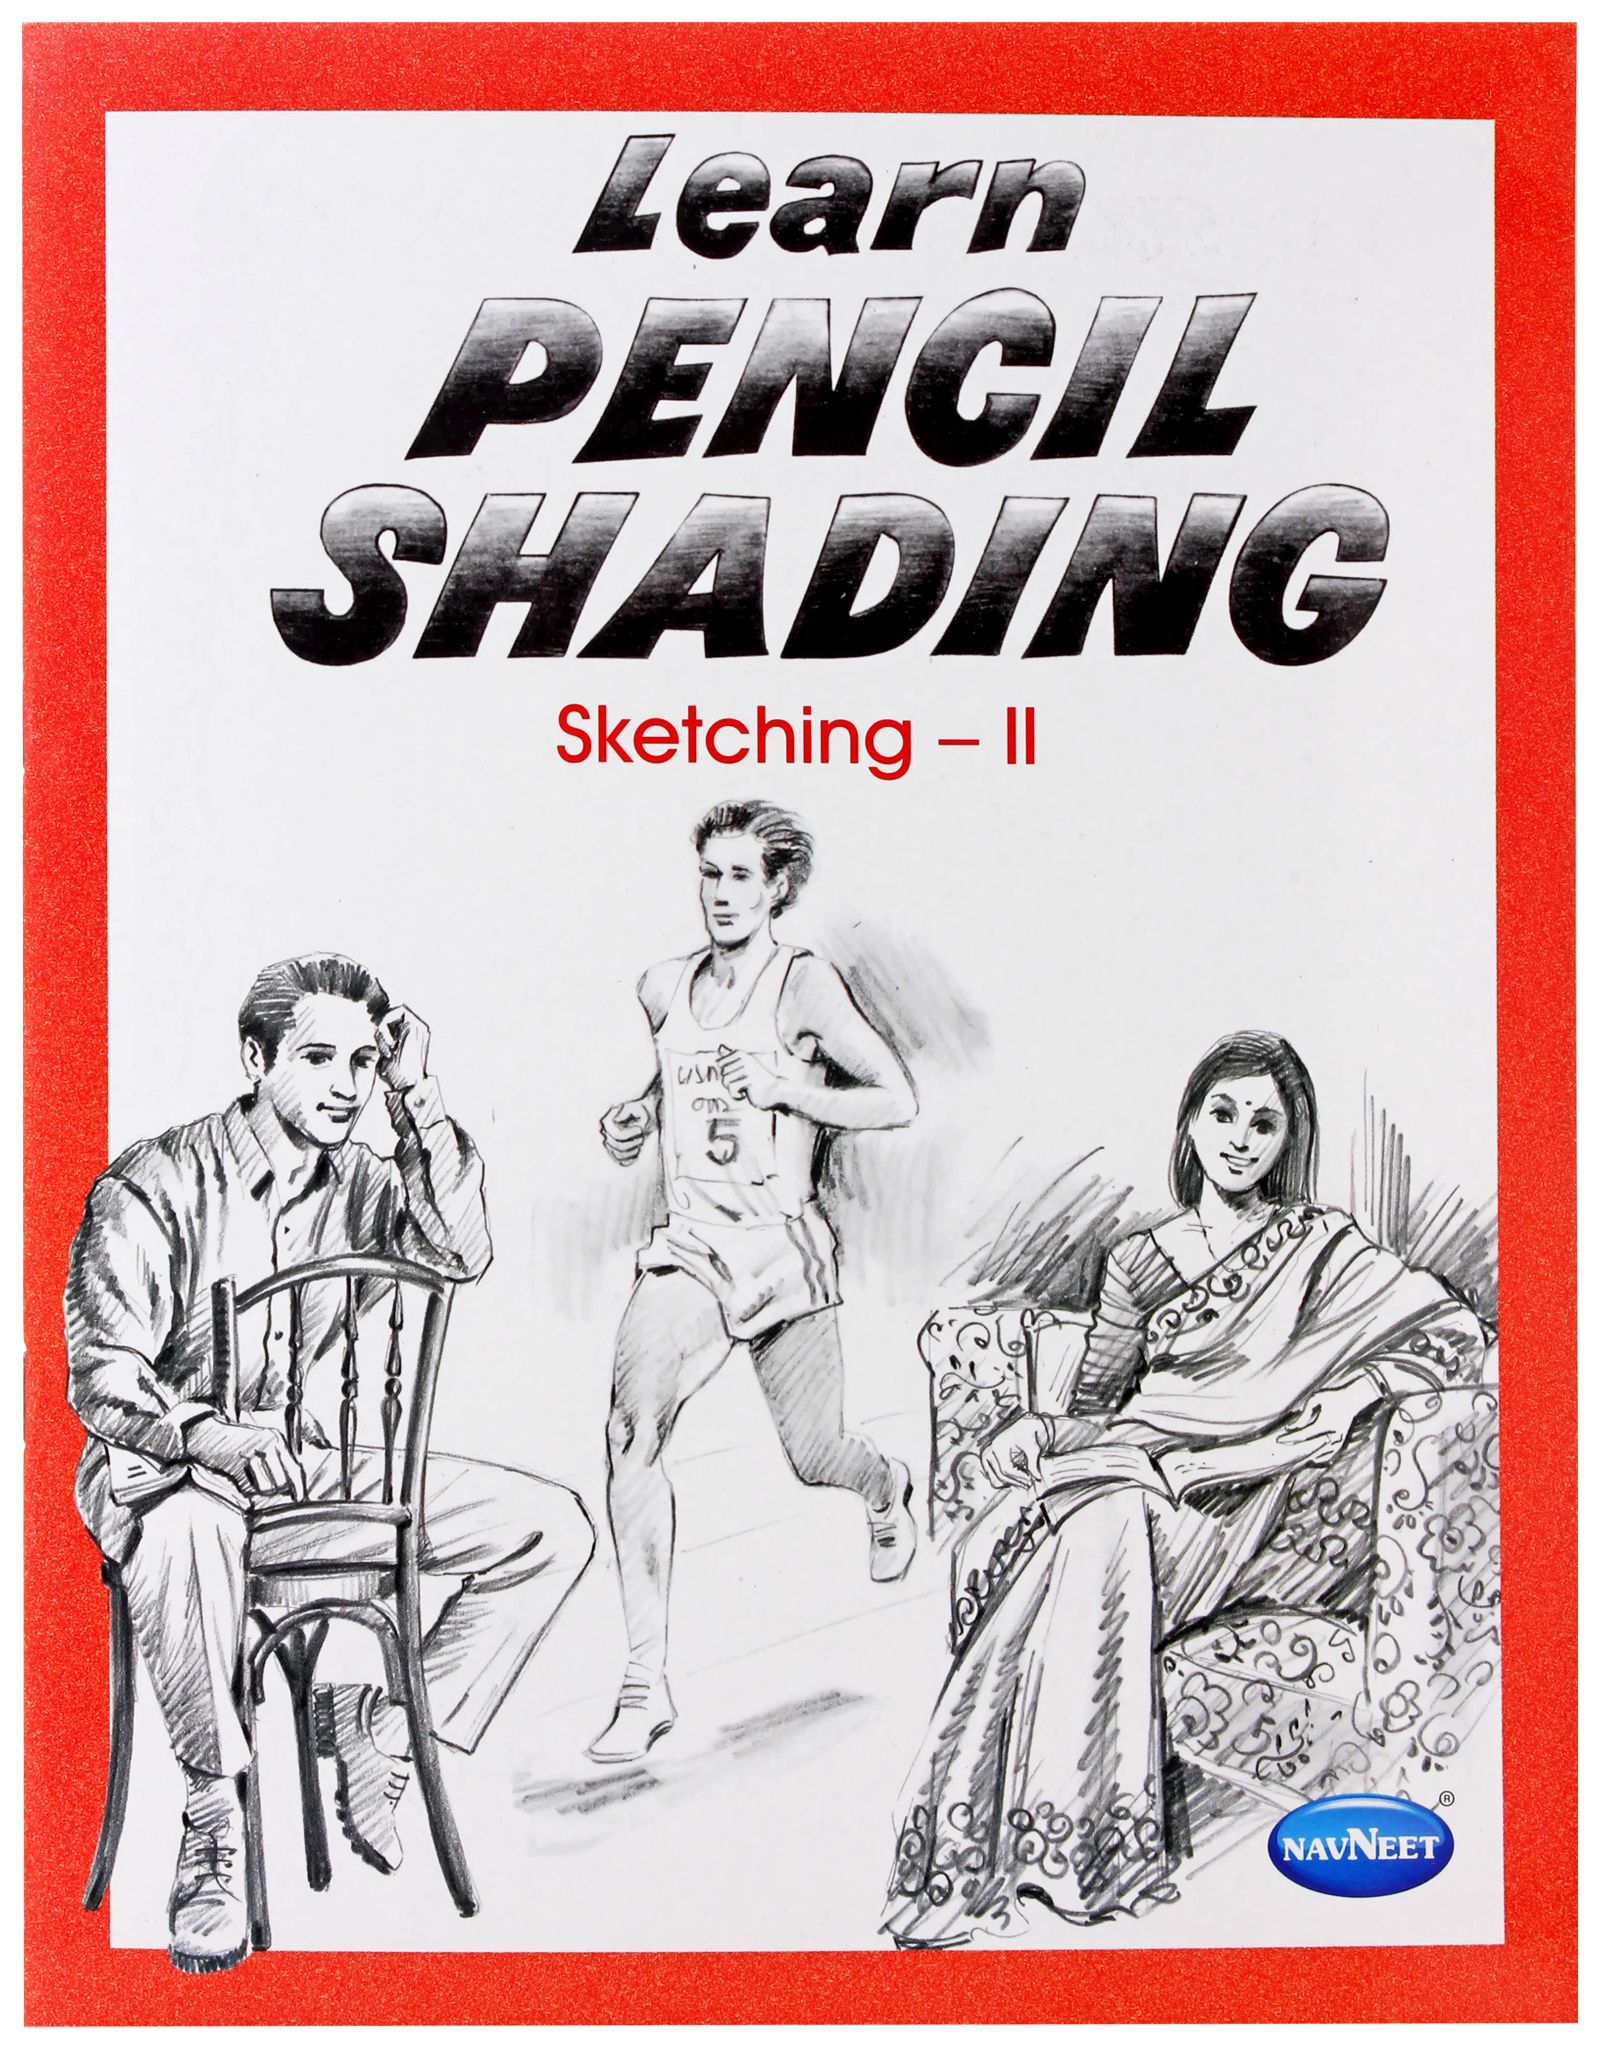 73 New Ideas Navneet pencil shading books pdf for Adult